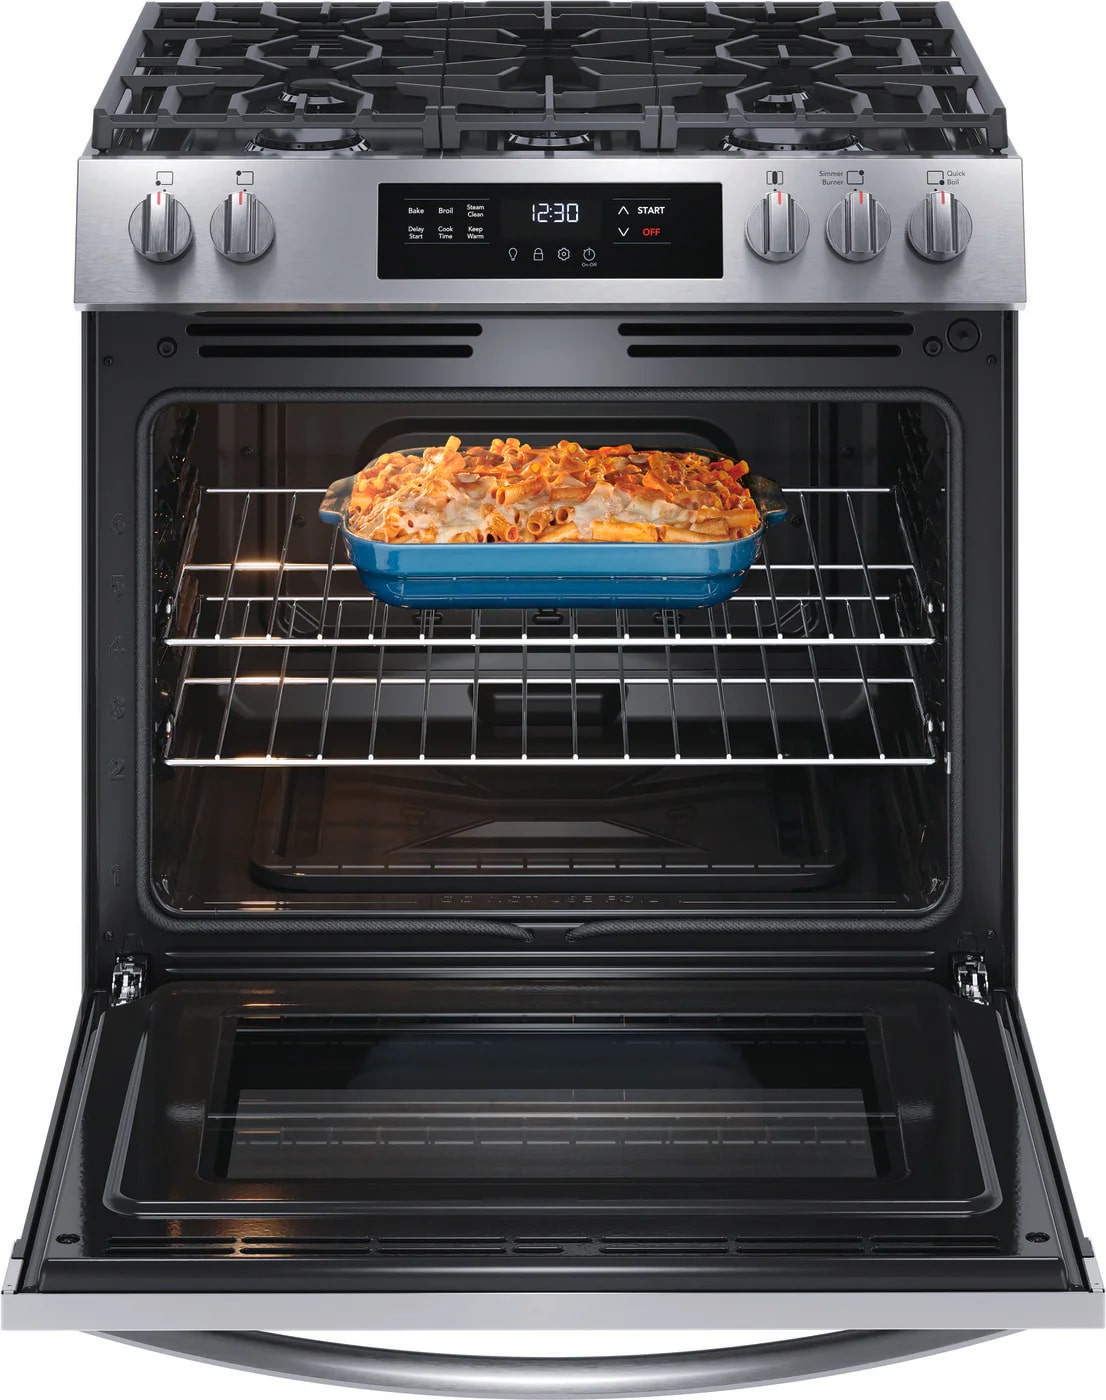 Frigidaire - 5.1 cu. ft  Gas Range in Stainless - FCFG3062AS